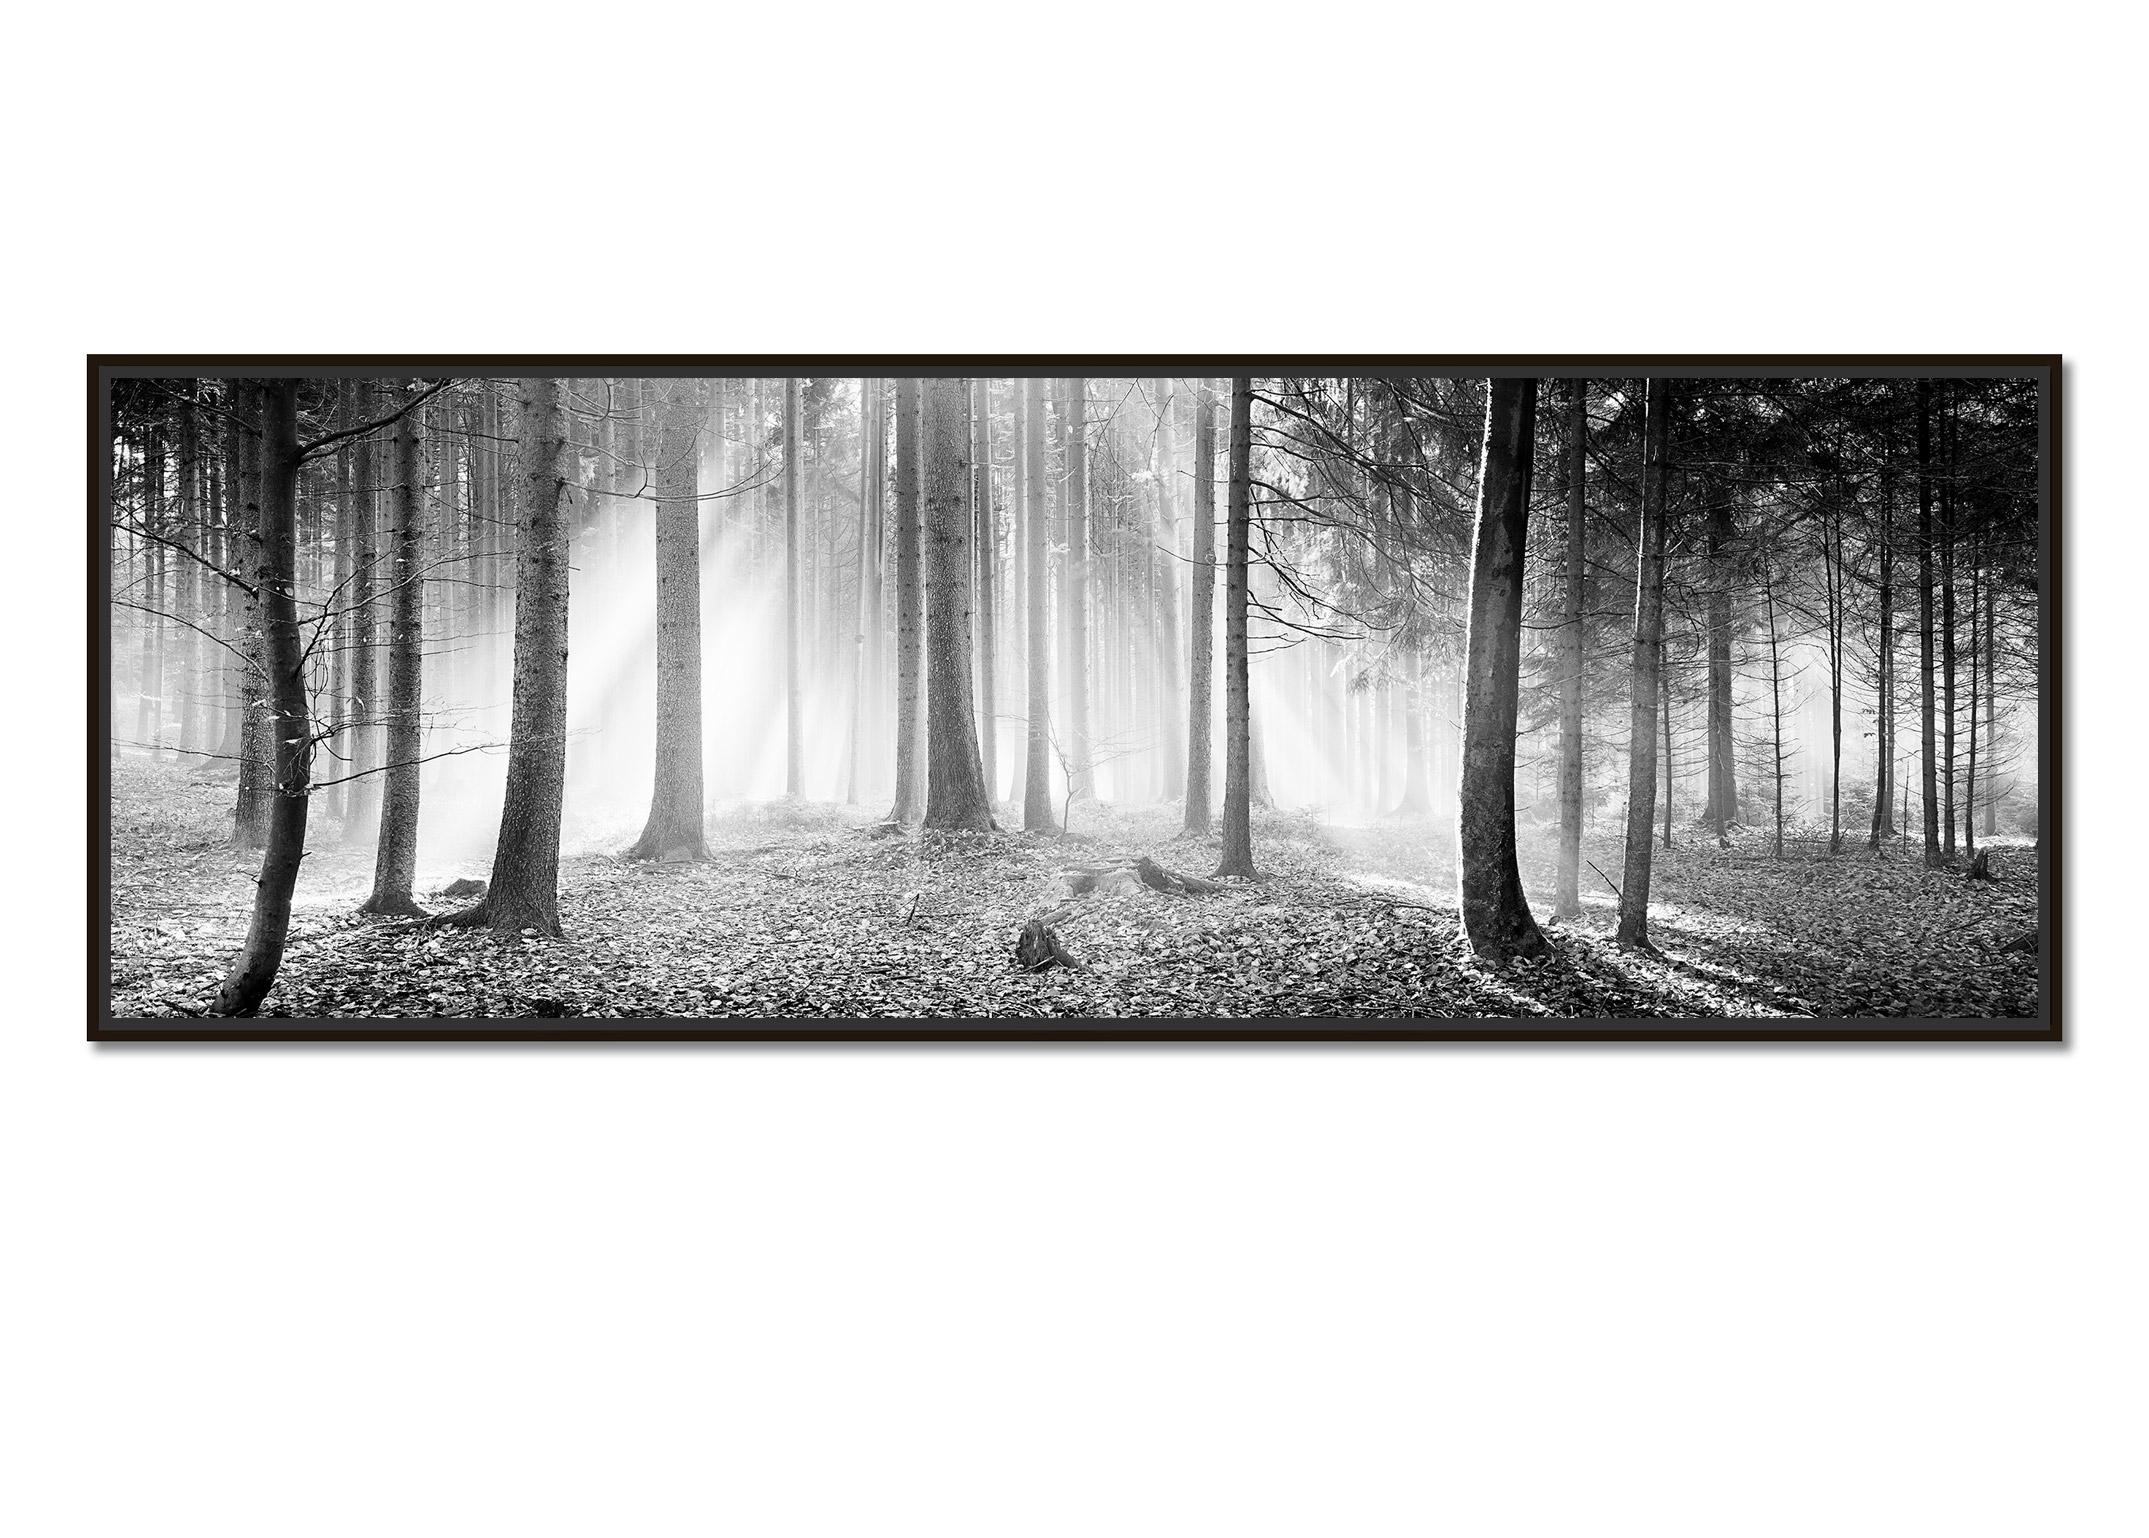 Enchanted Forest, Austria, black and white photography, sunny, foggy, landscapes - Photograph by Gerald Berghammer, Ina Forstinger